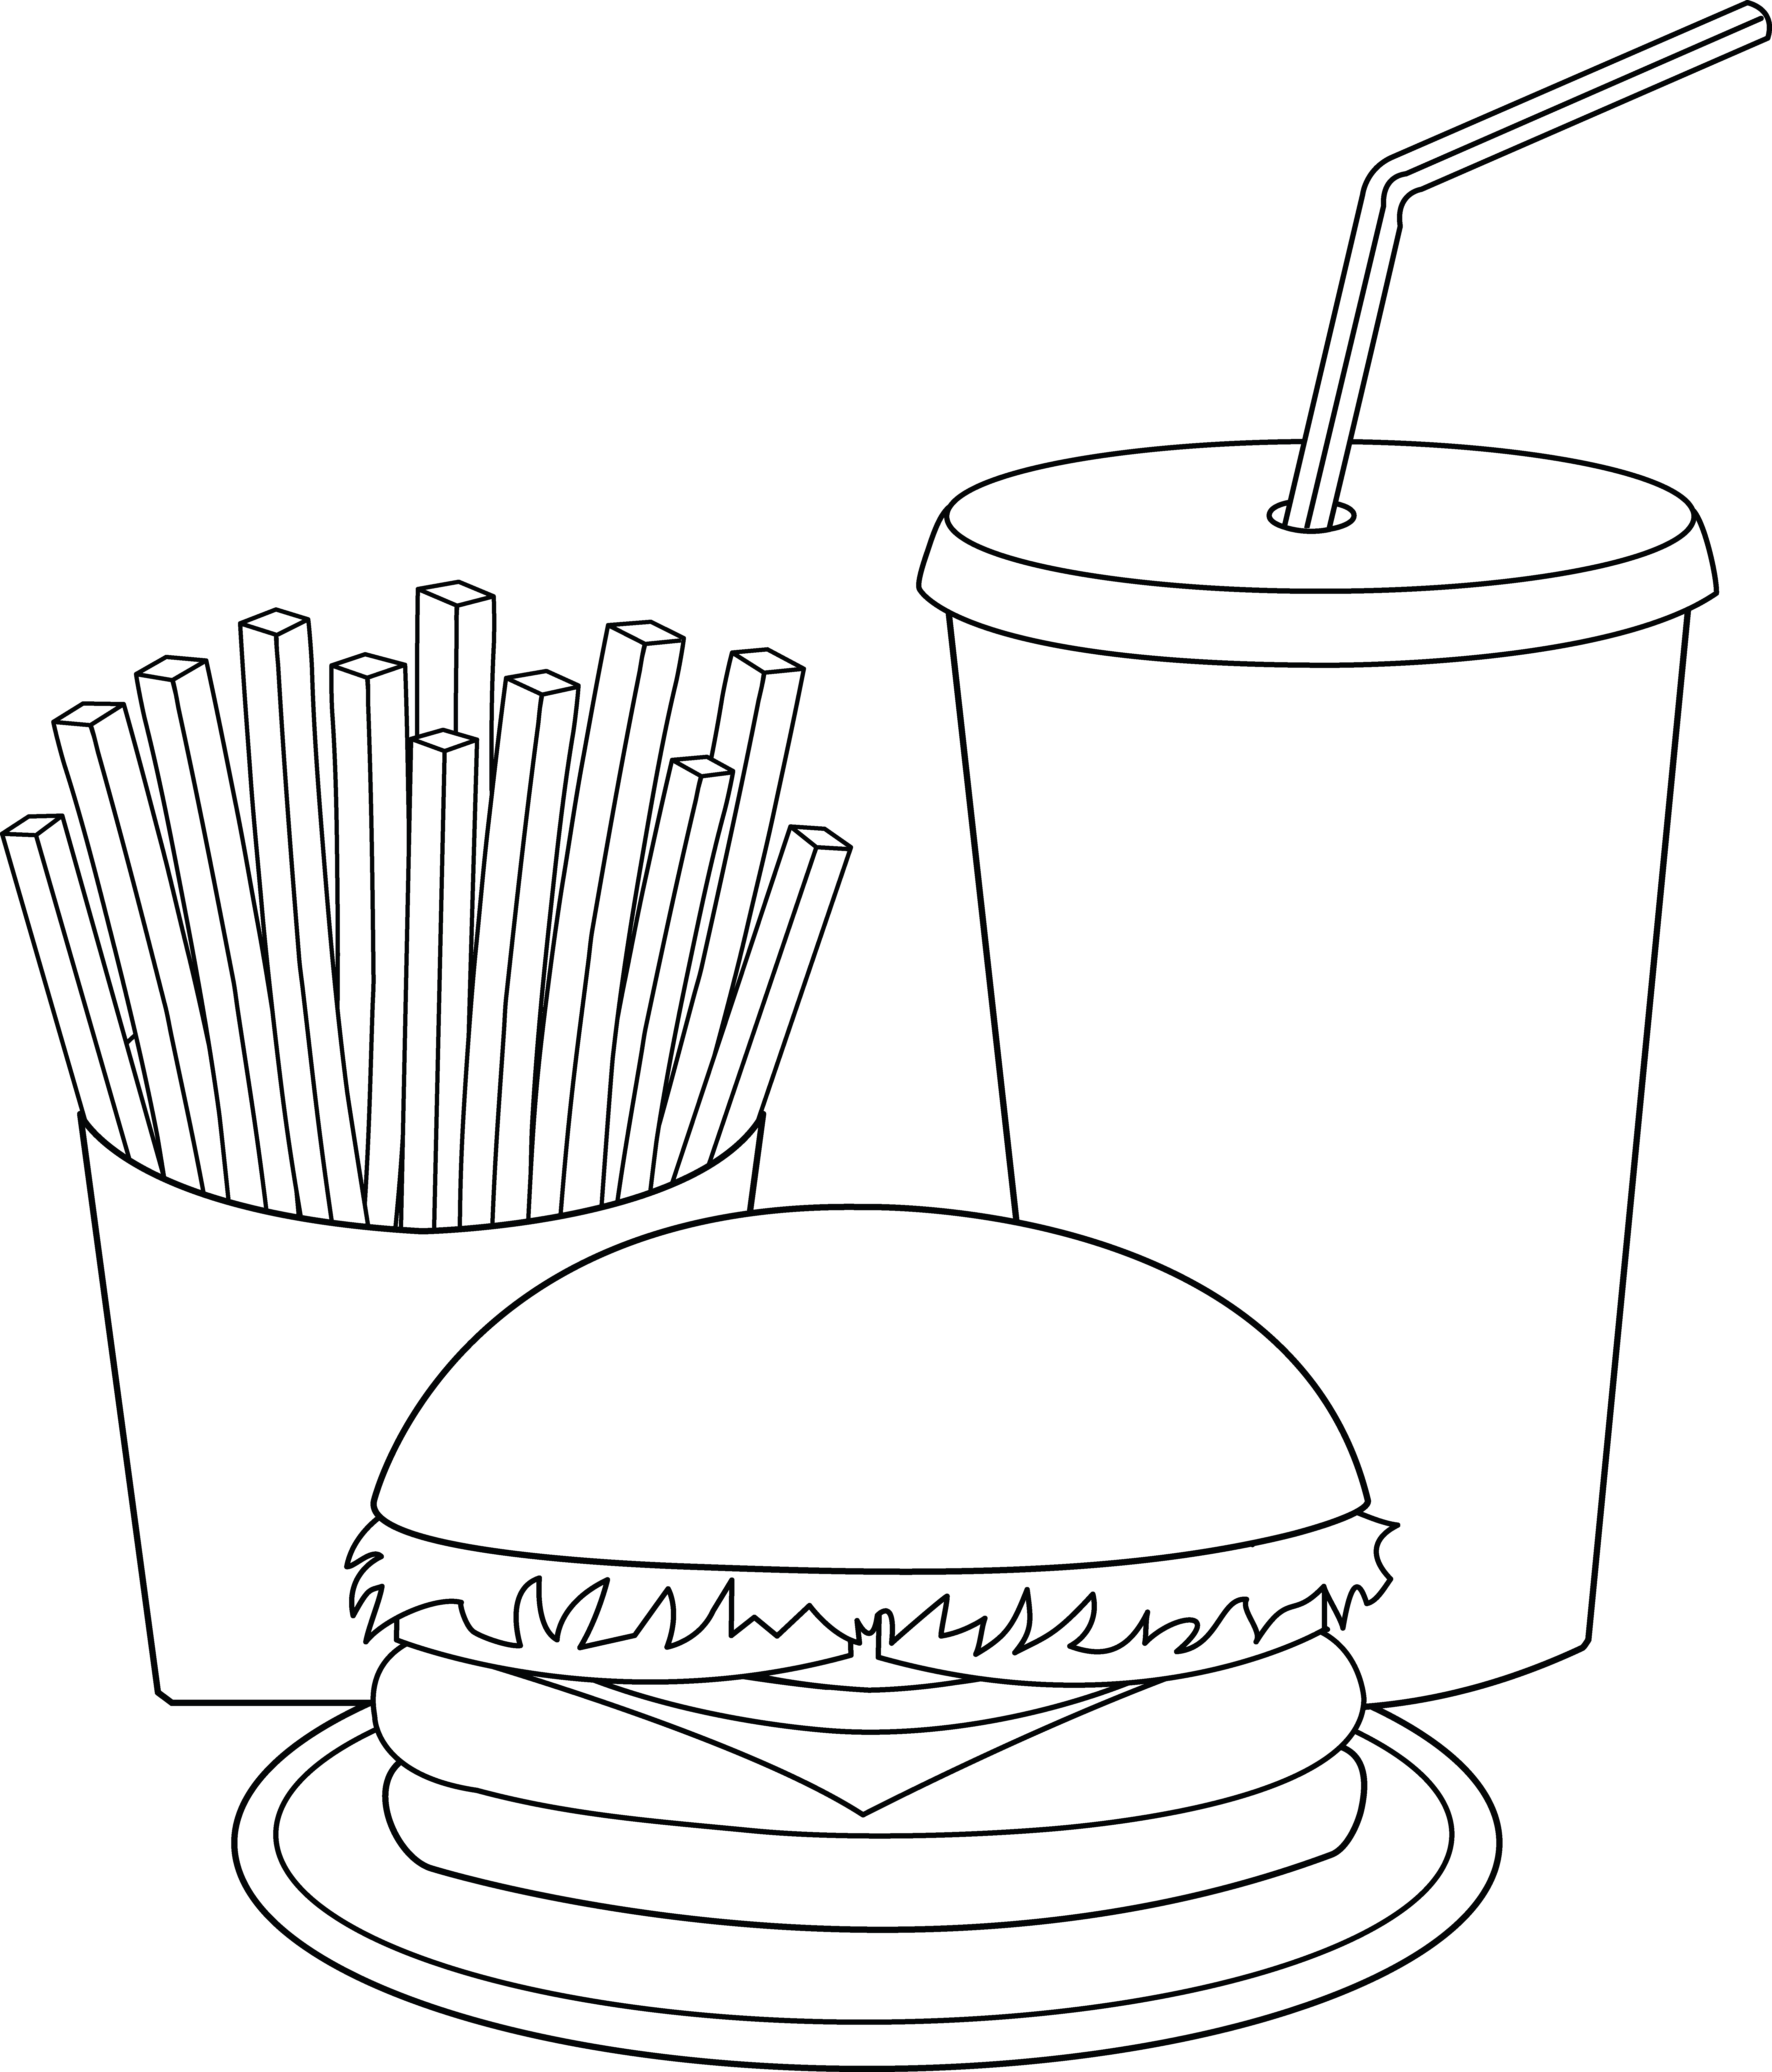 Fast food clipart black and white